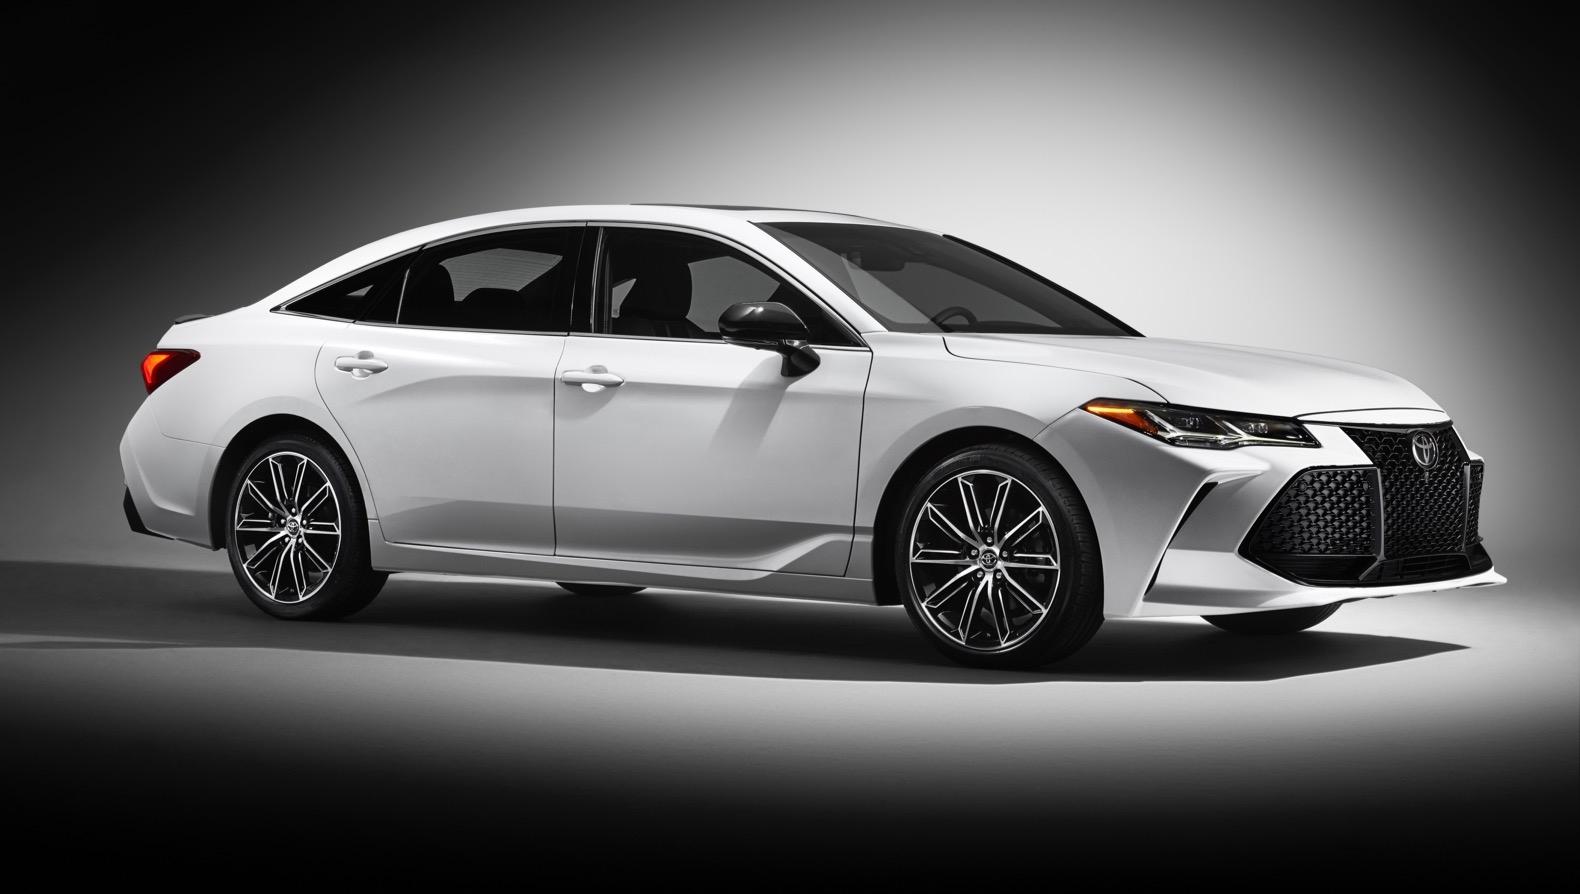 Toyota Camry. Look HD Wallpaper. New Car Release News